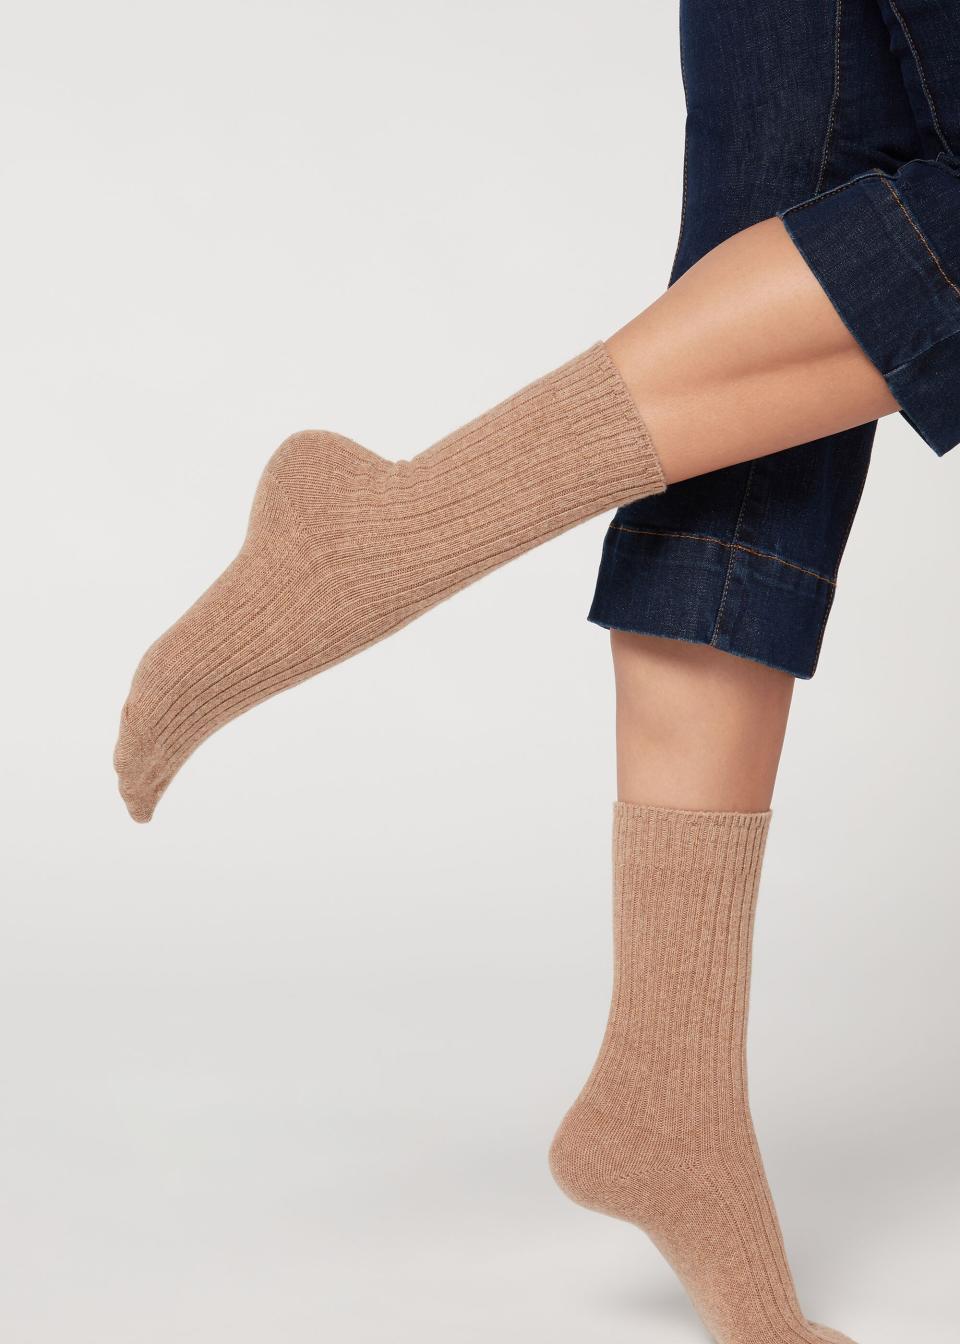 3) Short Ribbed Socks with Wool and Cashmere